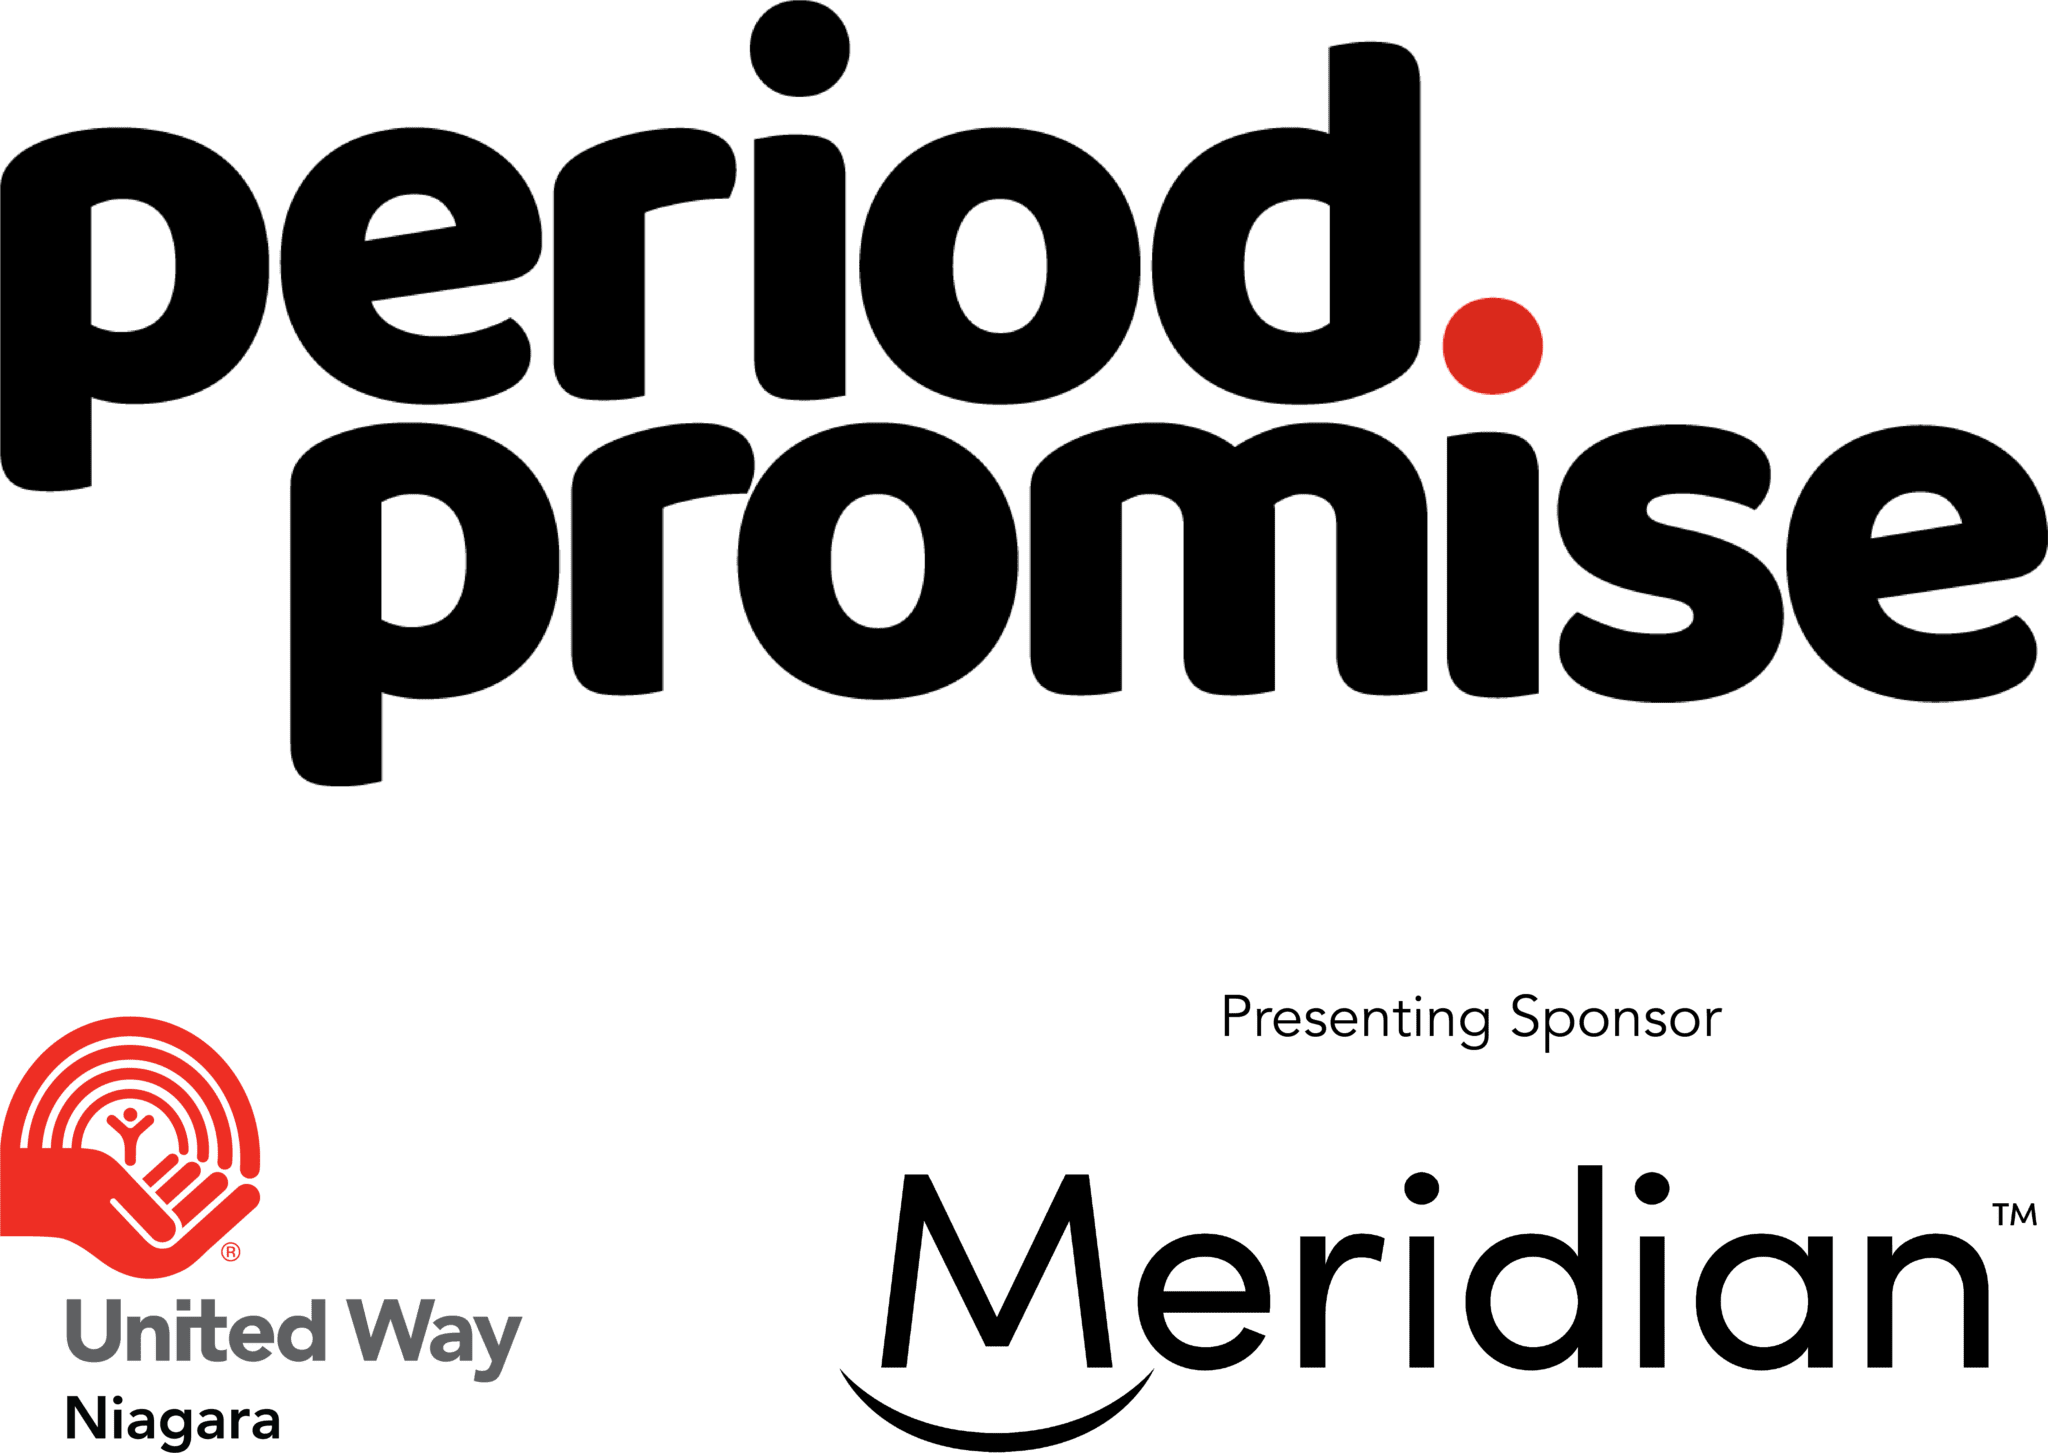 Period Promise United Way Presenting Sponsor Meridian Credit Union